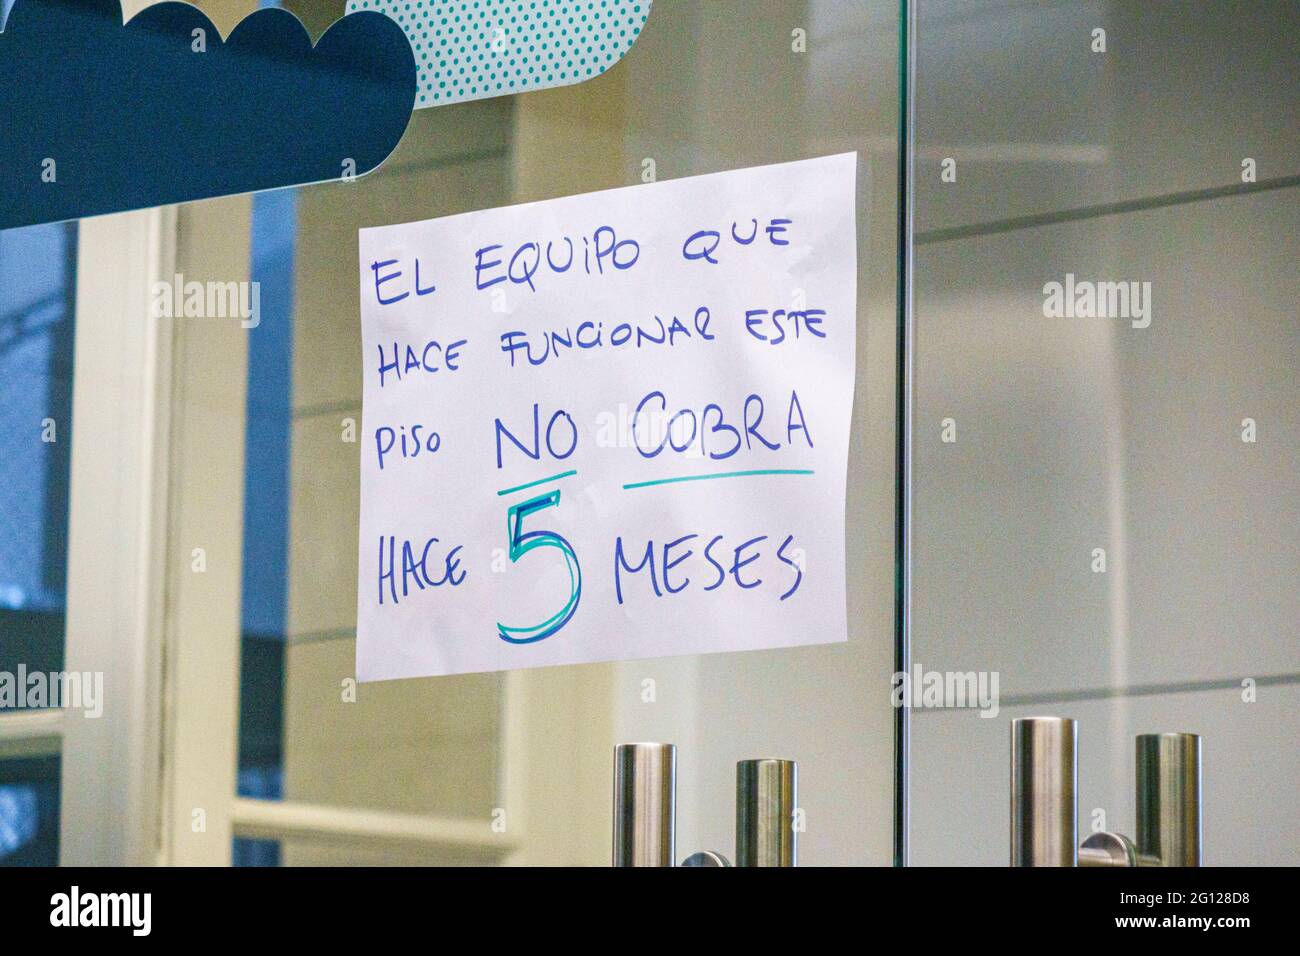 Argentina Buenos Aires Plaza del Correo Centro Cultural Kirchner CCK cultural centre inside administrative office door sign anti-government protest Sp Stock Photo